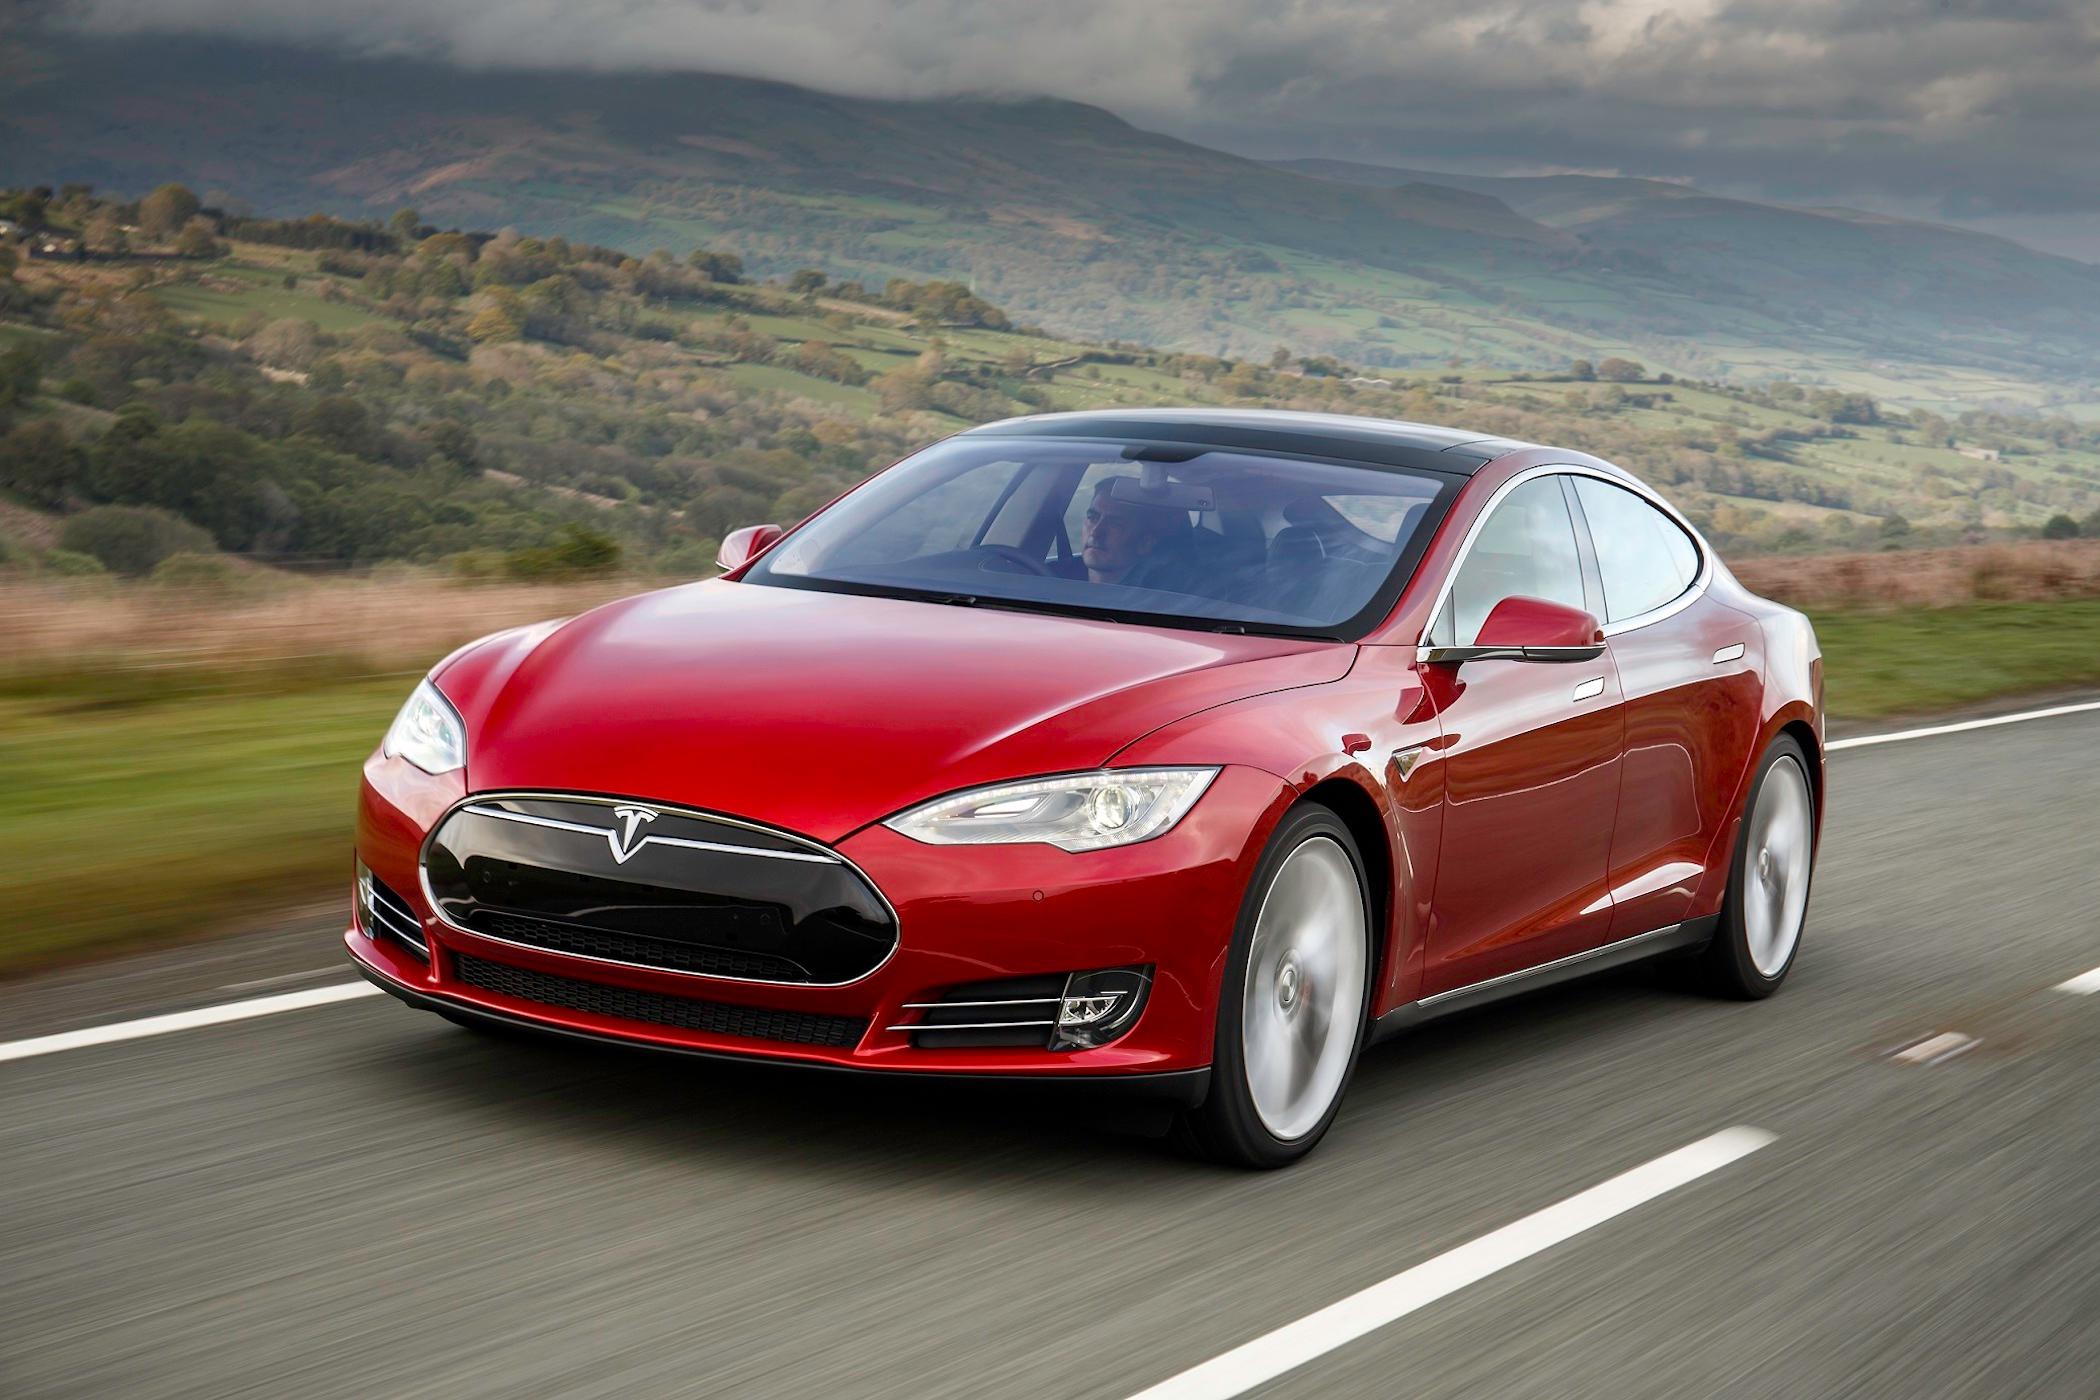 a red tesla model s driving on a road